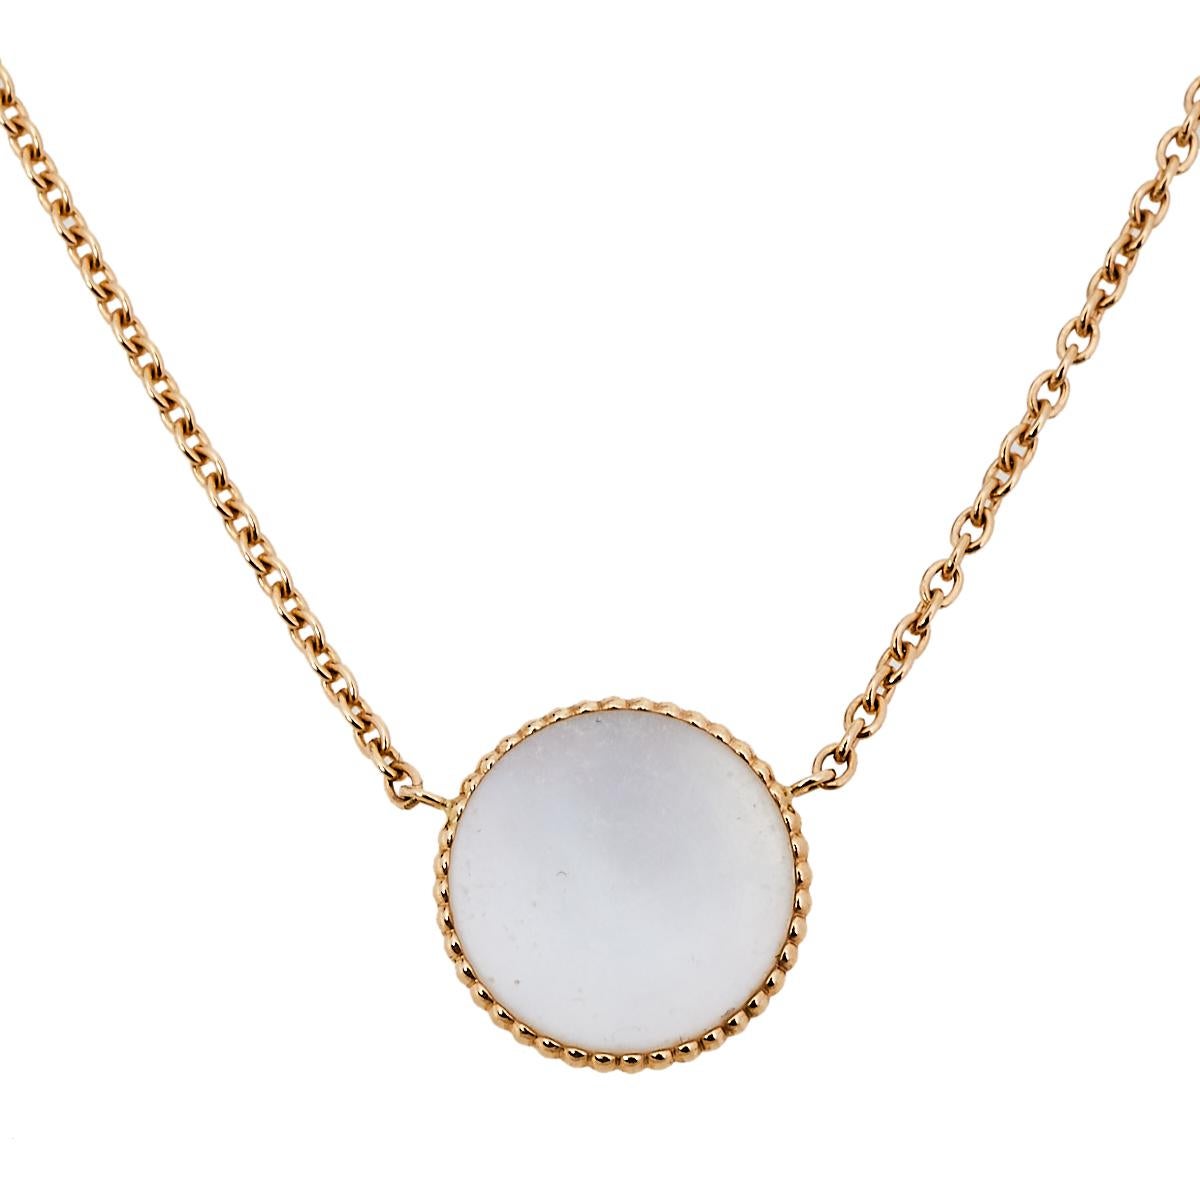 This Rose des Vents necklace by Dior exhibits the talisman star as its main highlight. The necklace's design features a round pendant inlaid with mother of pearl and outlined with 18k yellow gold beaded borders. The motif is further accented with a